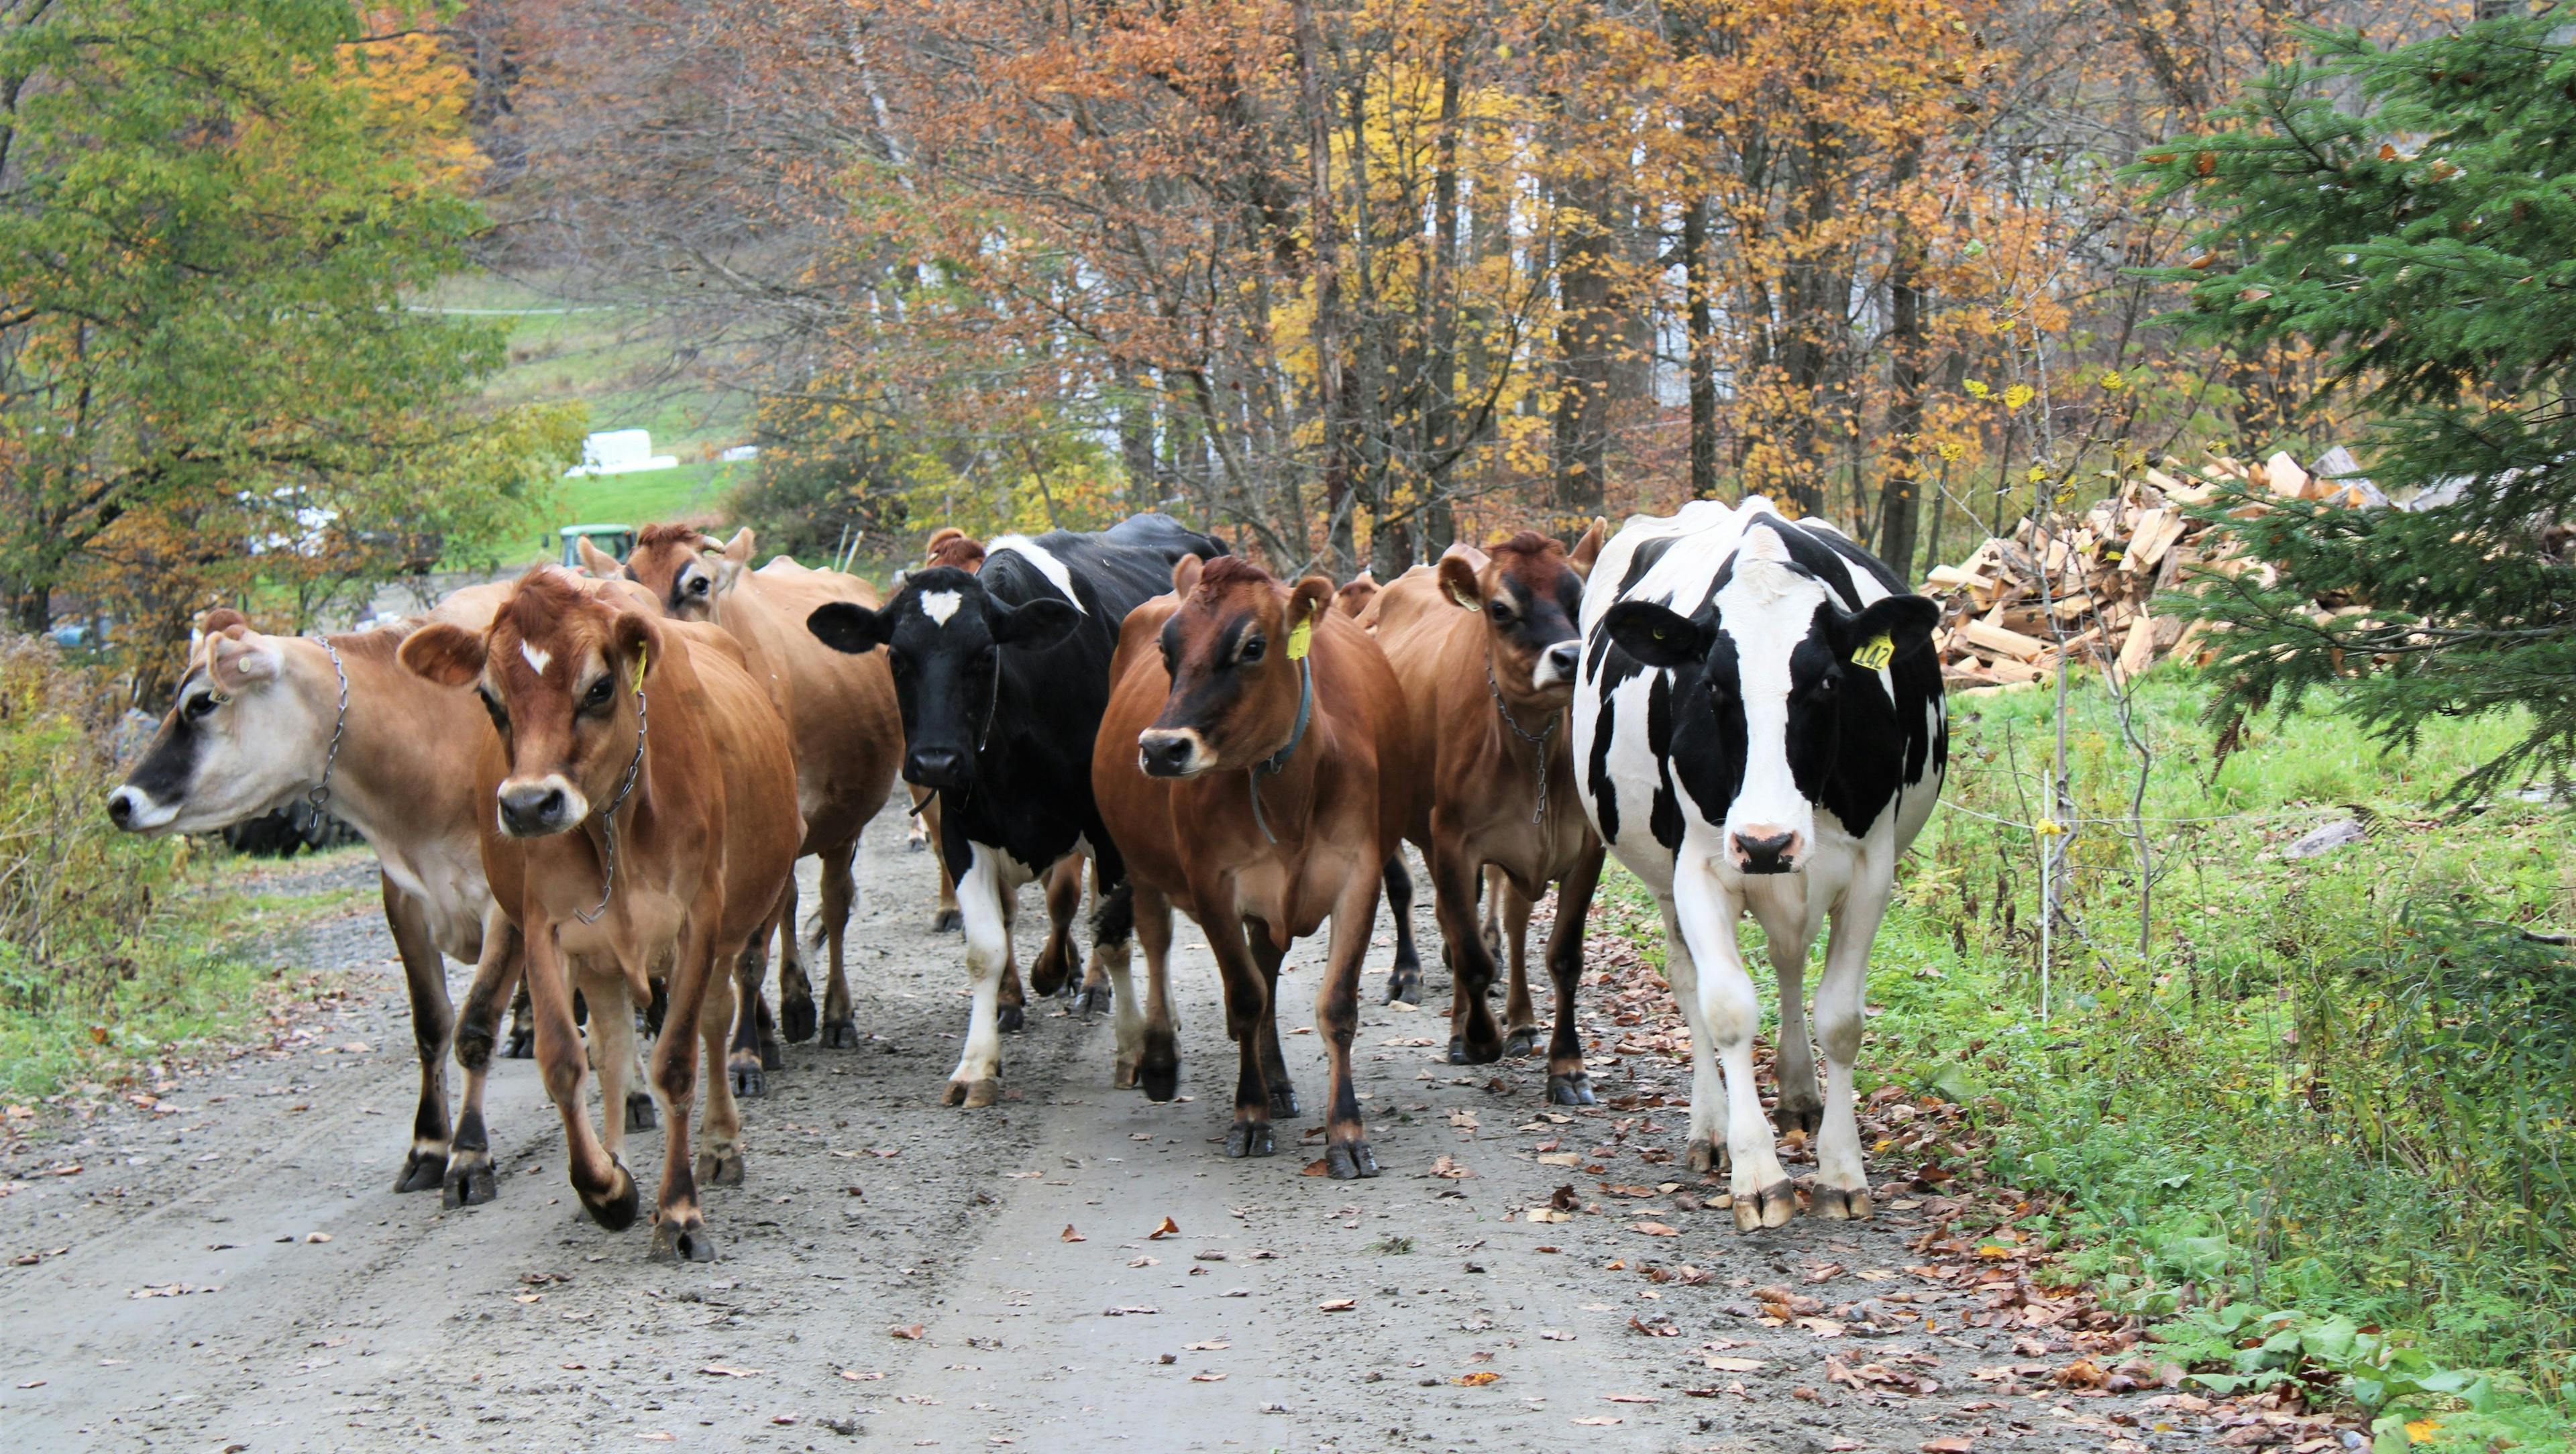 Organic dairy cows walk up a lane with fall foliage all around at the Roberge farm in Vermont.